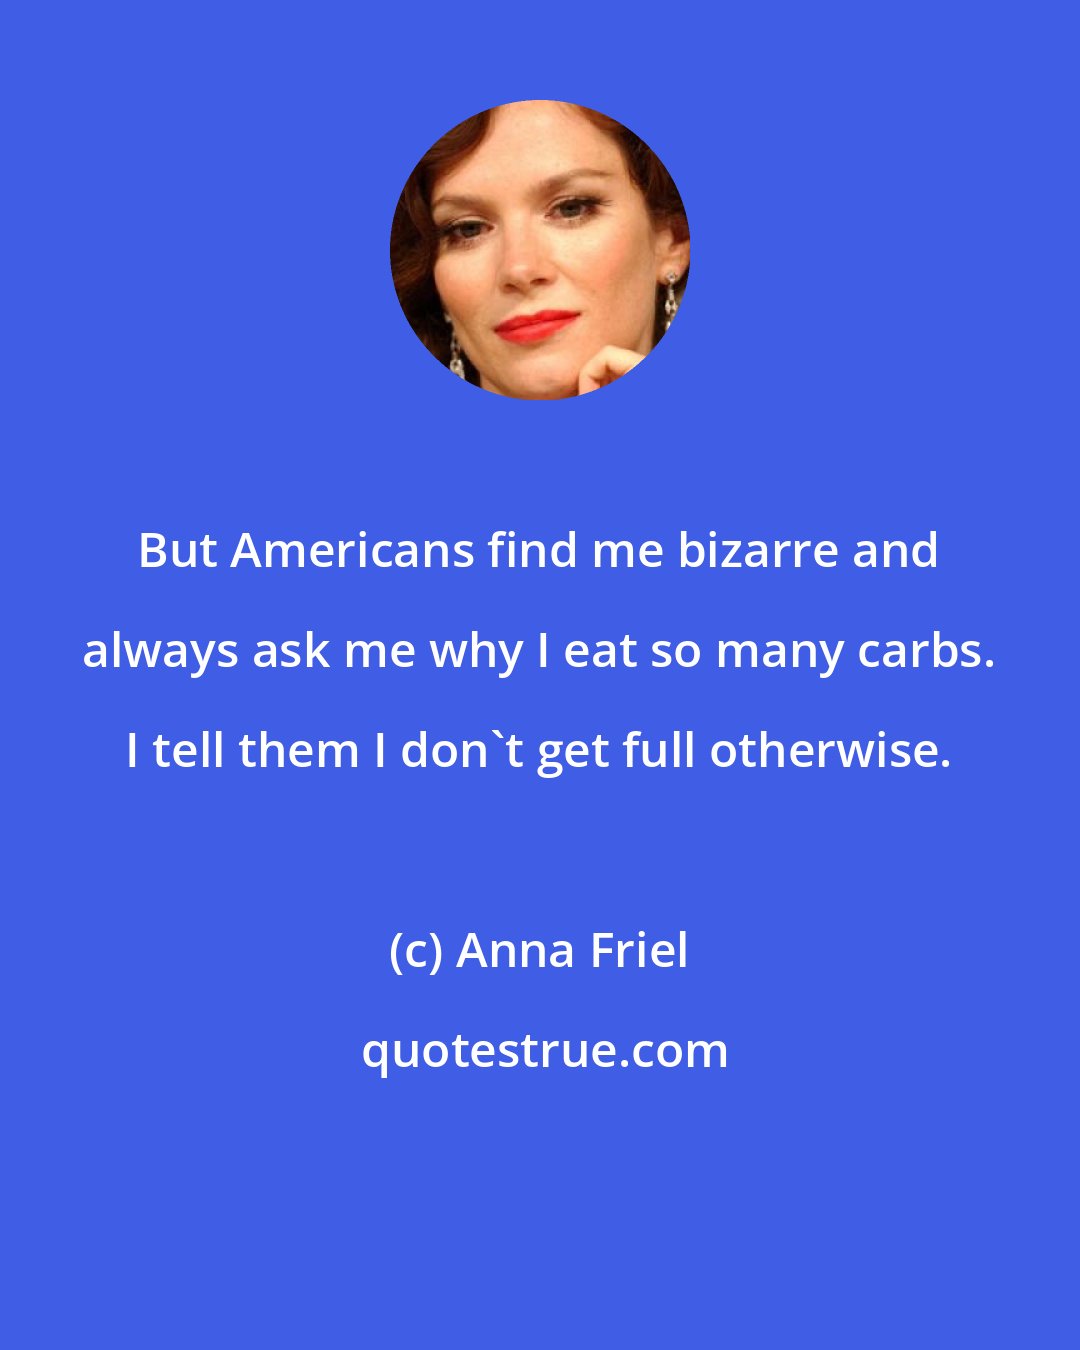 Anna Friel: But Americans find me bizarre and always ask me why I eat so many carbs. I tell them I don't get full otherwise.